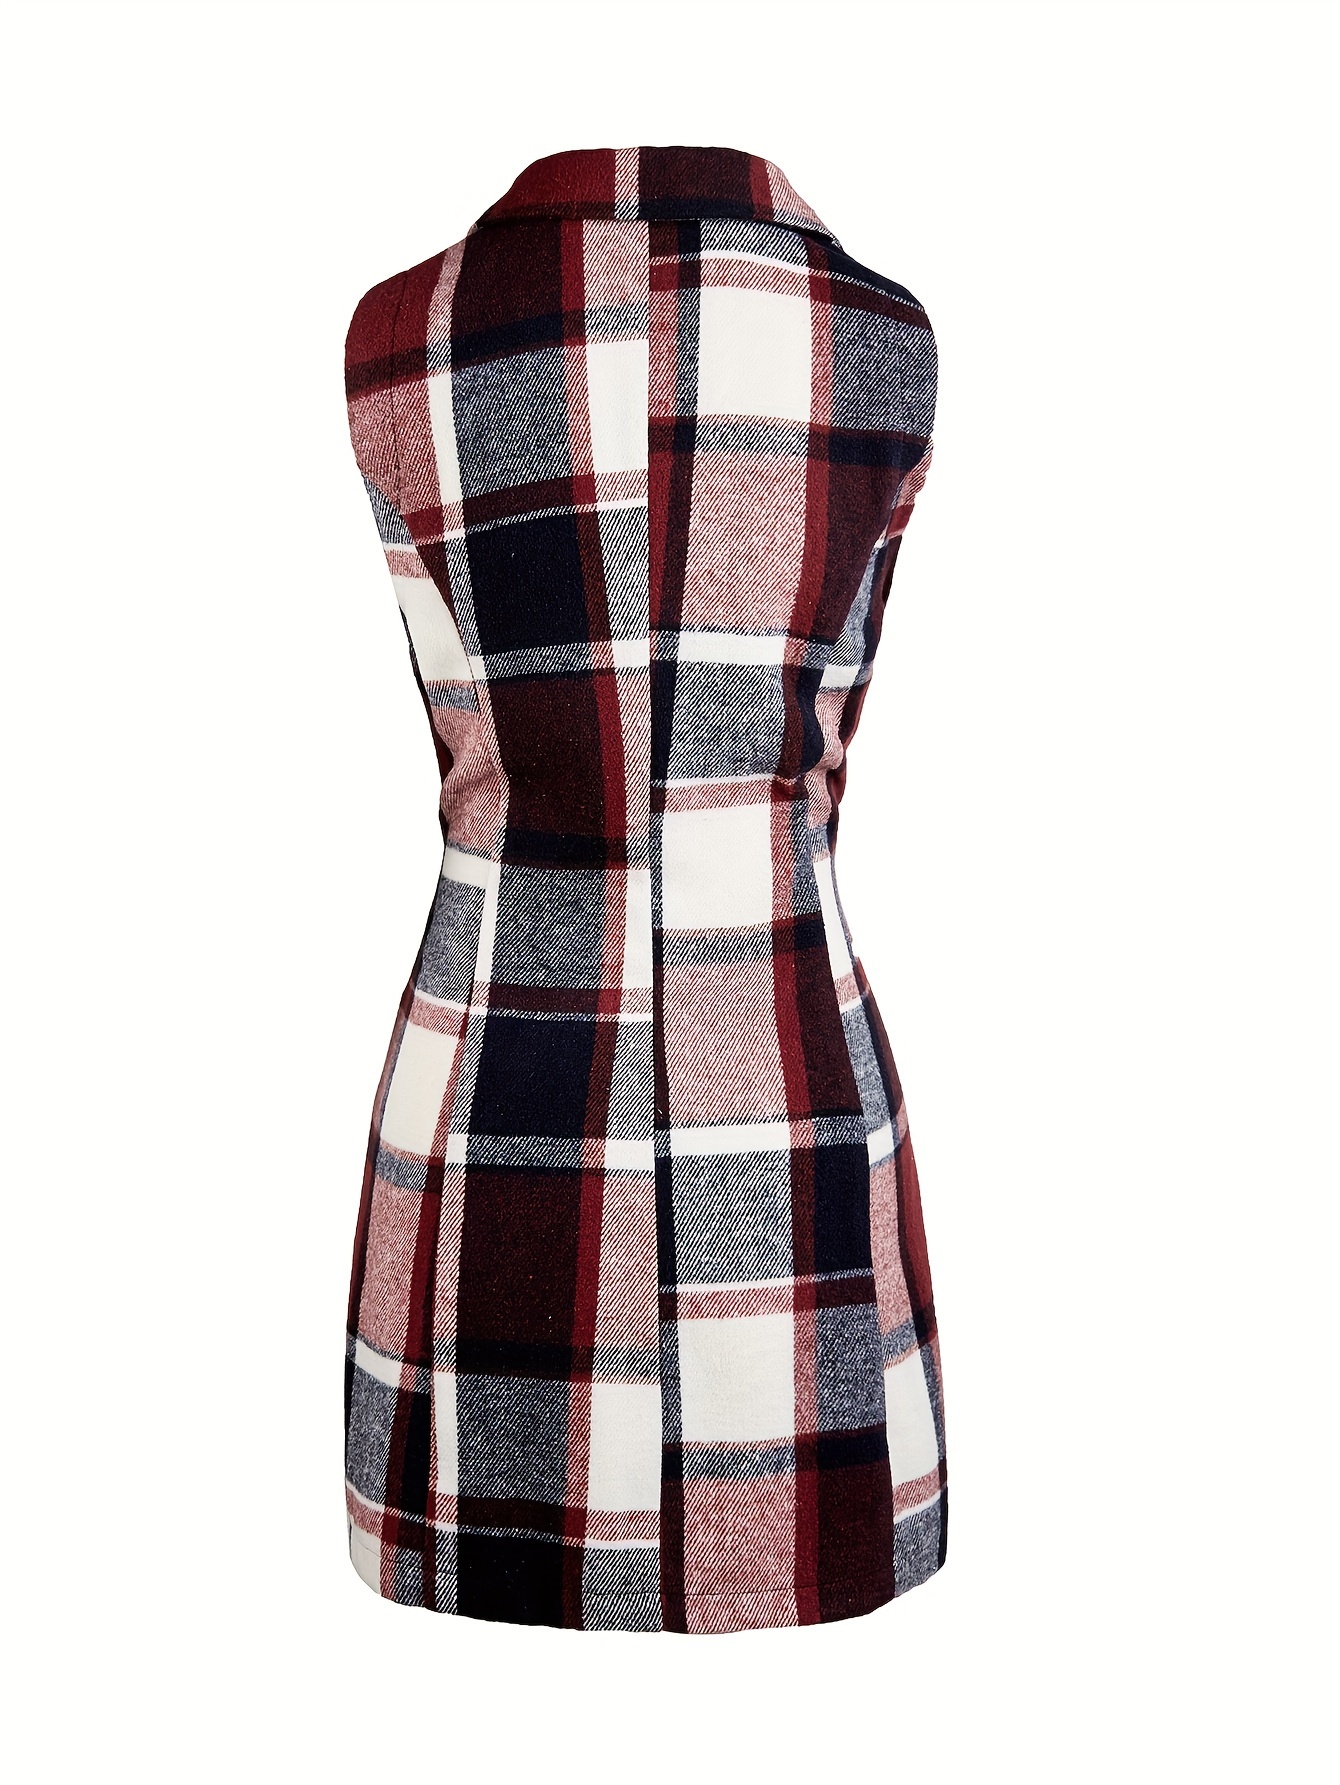 plaid sleeveless lapel blazer casual single breasted outerwear womens clothing details 1